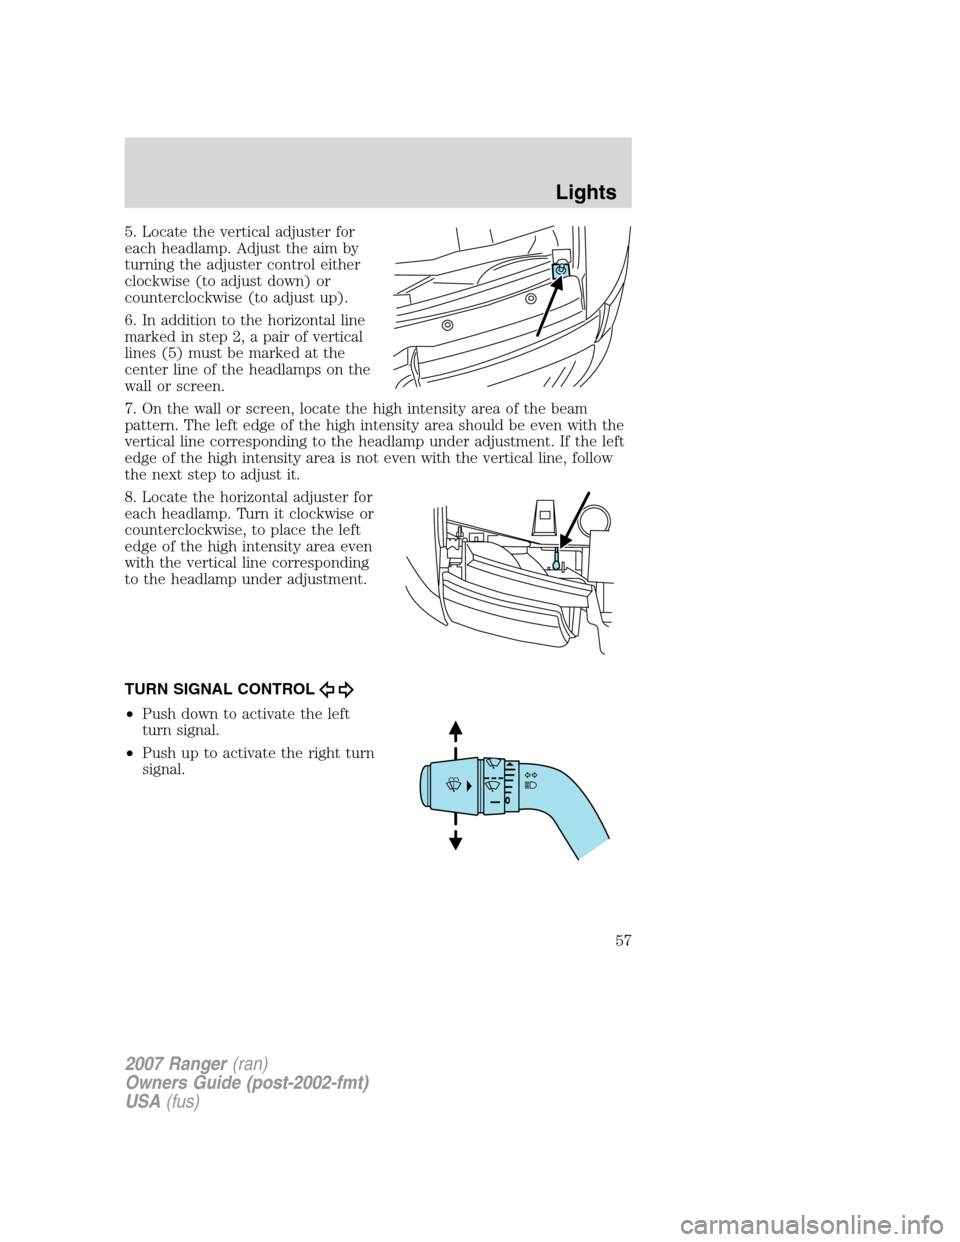 FORD RANGER 2007 2.G Owners Manual 5. Locate the vertical adjuster for
each headlamp. Adjust the aim by
turning the adjuster control either
clockwise (to adjust down) or
counterclockwise (to adjust up).
6. In addition to the horizontal